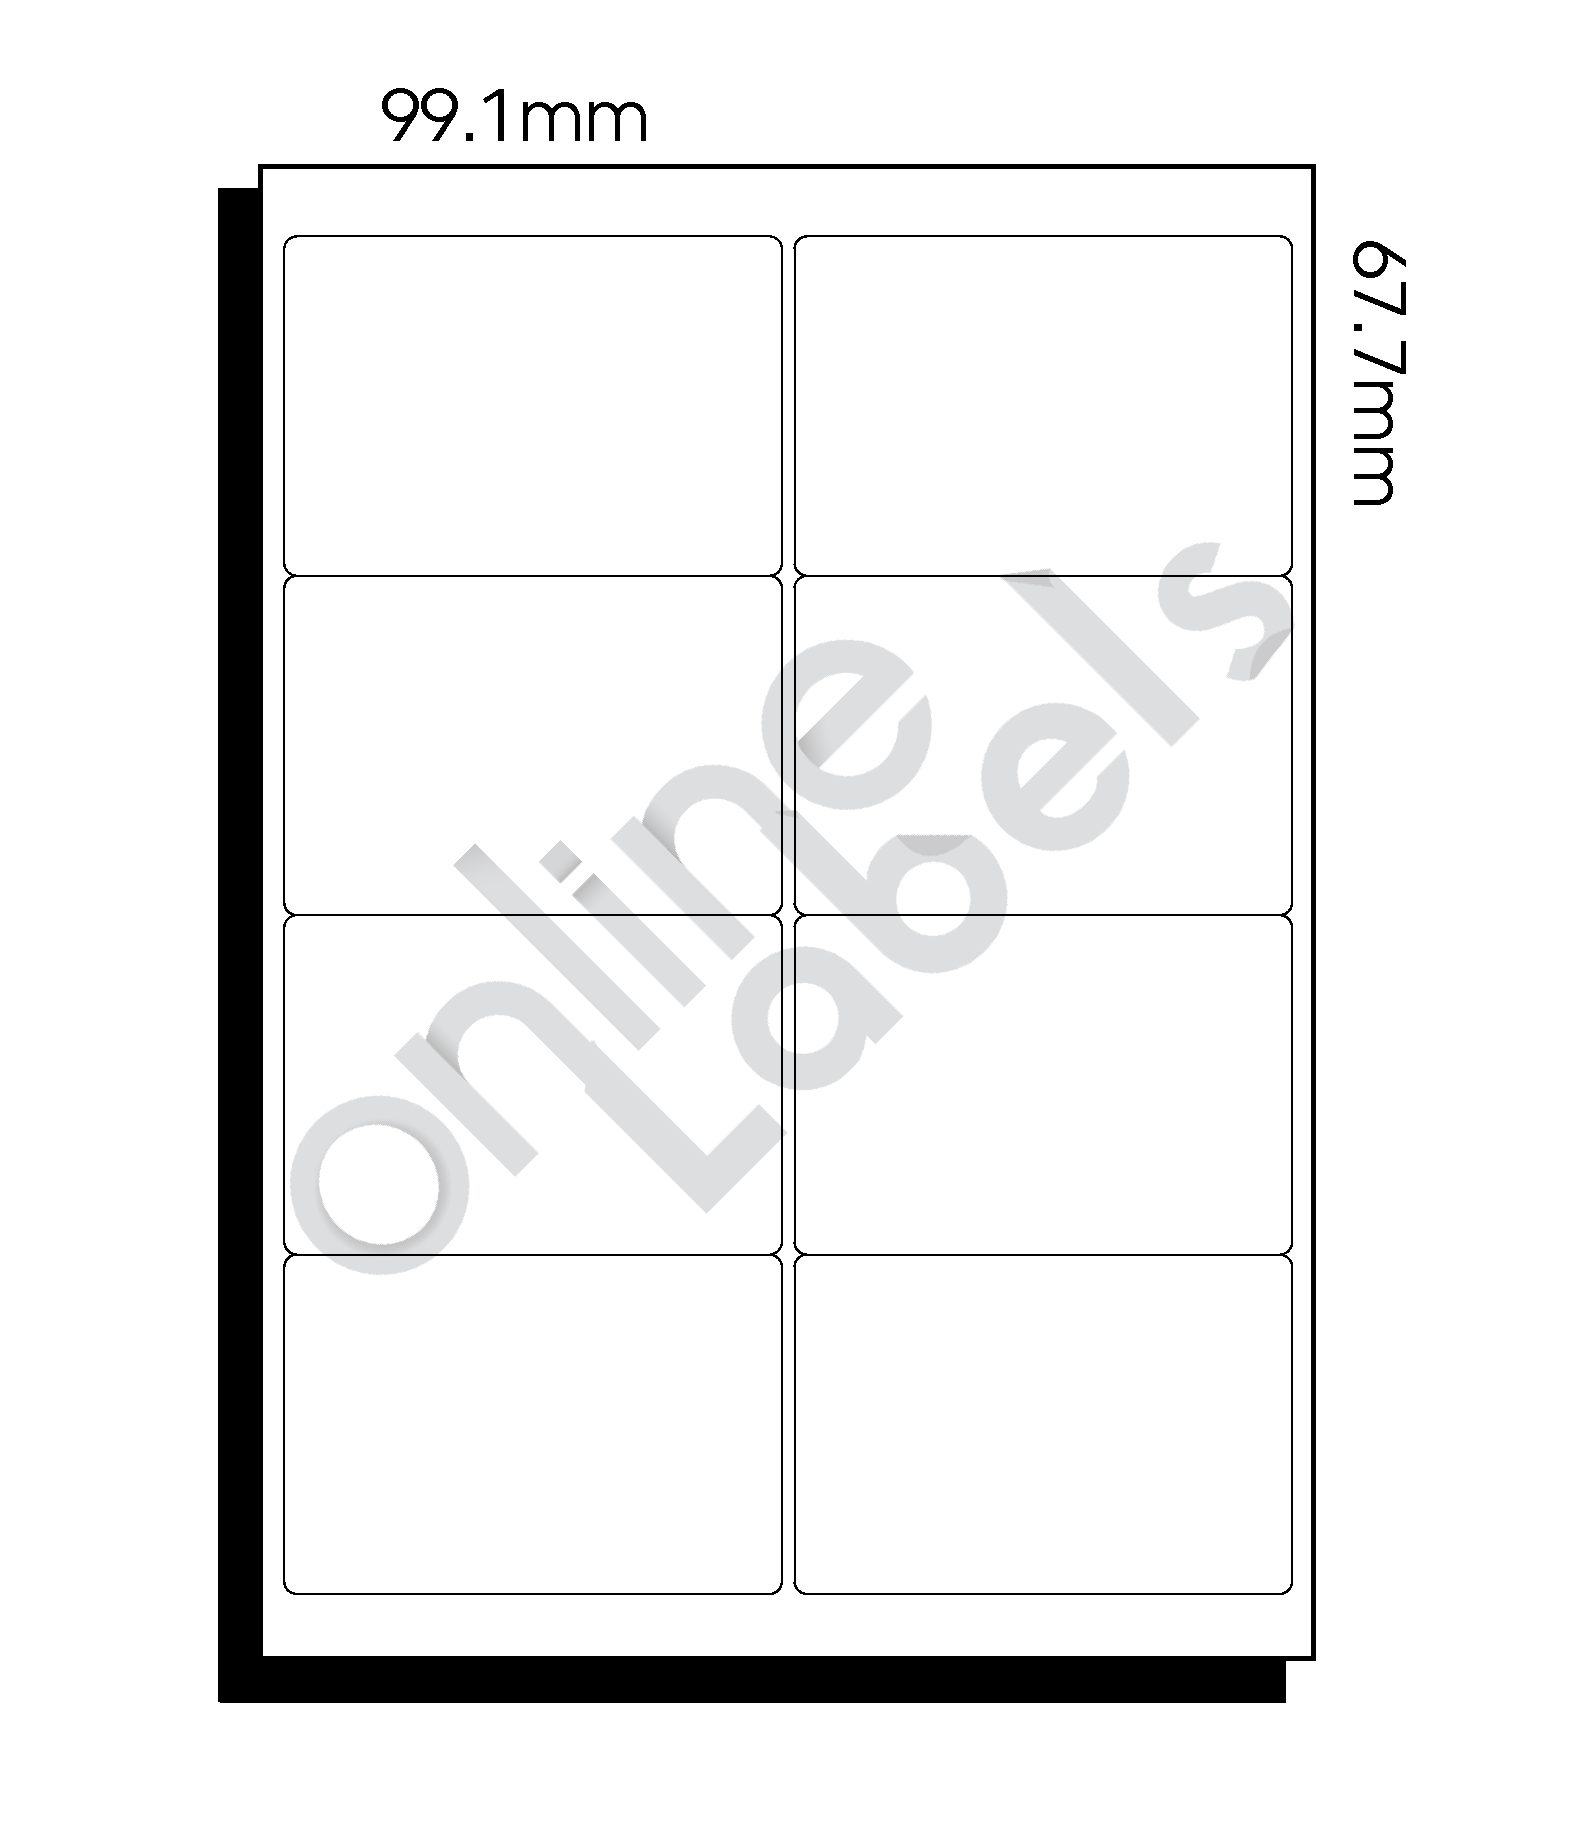 221.21mm x 21.21mm - 21 Labels per Sheet - Online Labels Pertaining To Template For Labels 8 Per Sheet